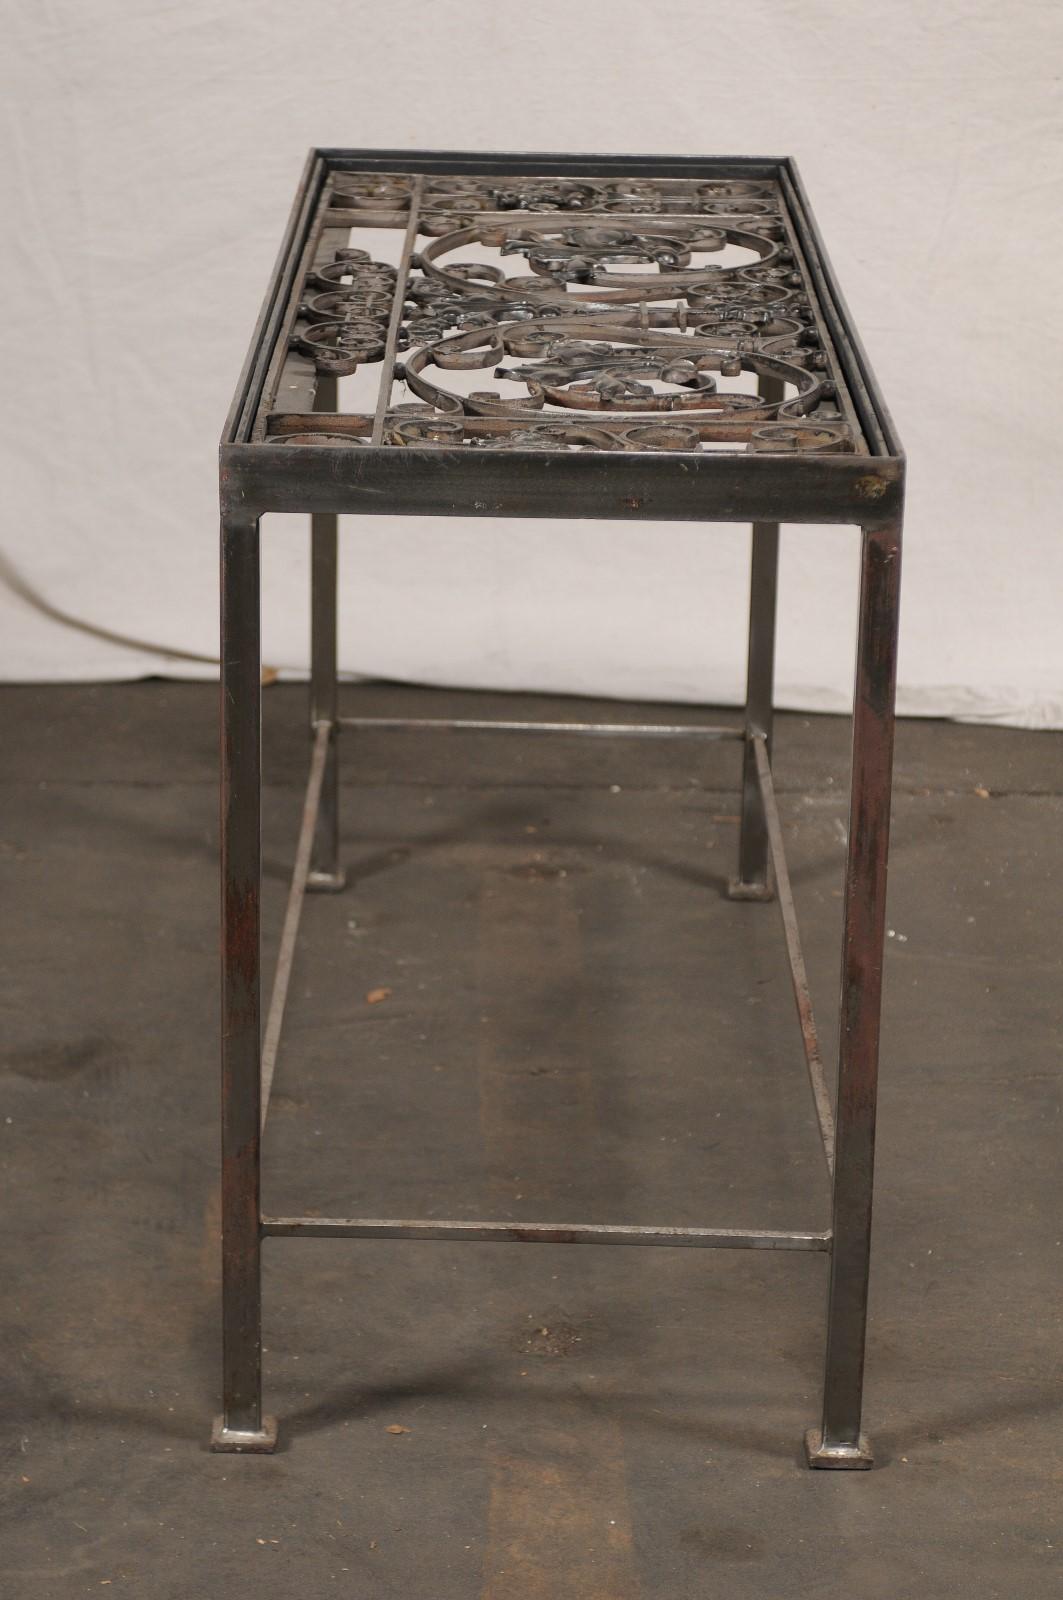 20th Century Iron Console Table with Iron Grate Insert For Sale 2